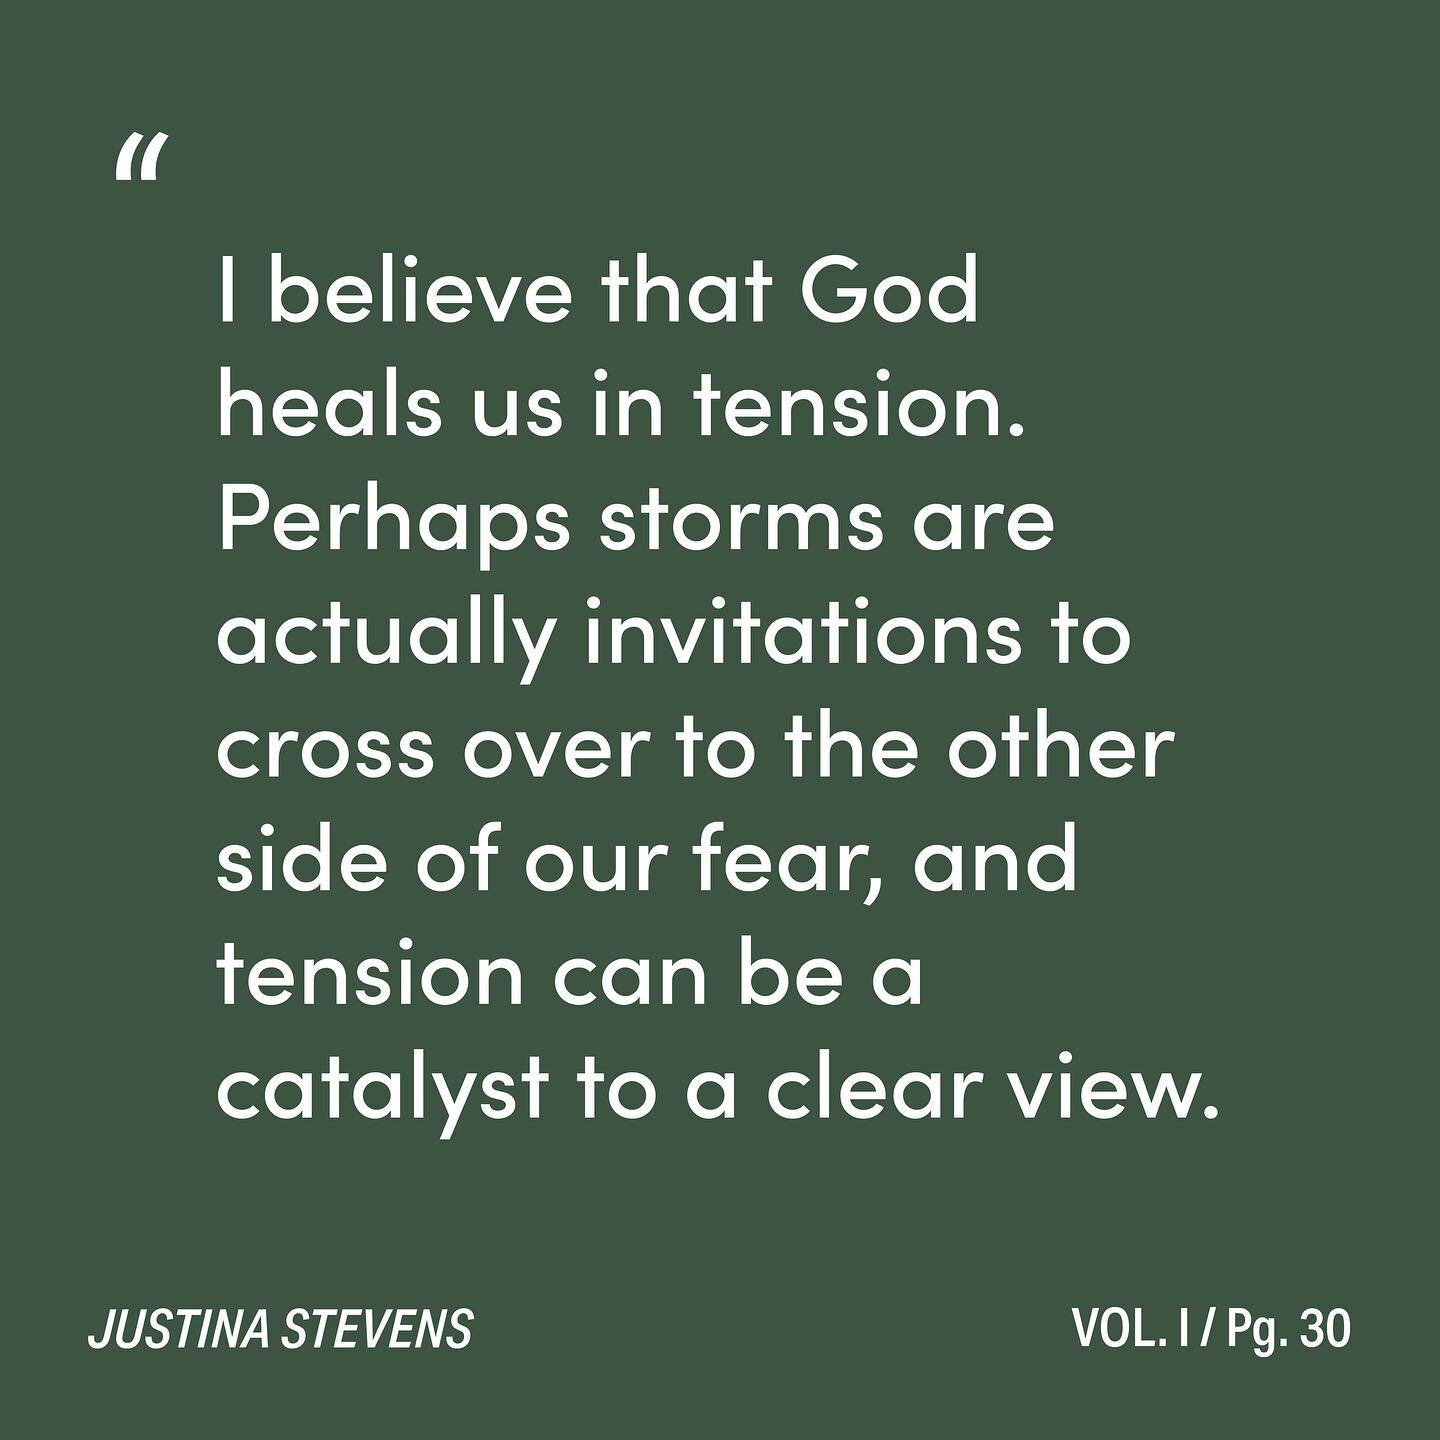 Jesus said, &ldquo;Let us cross over to the other side,&rdquo; and they got in a boat and set sail. Suddenly, a huge storm developed and the disciples lost control of the boat. The twelve, shaking in their boots and fearing for their lives, cried out